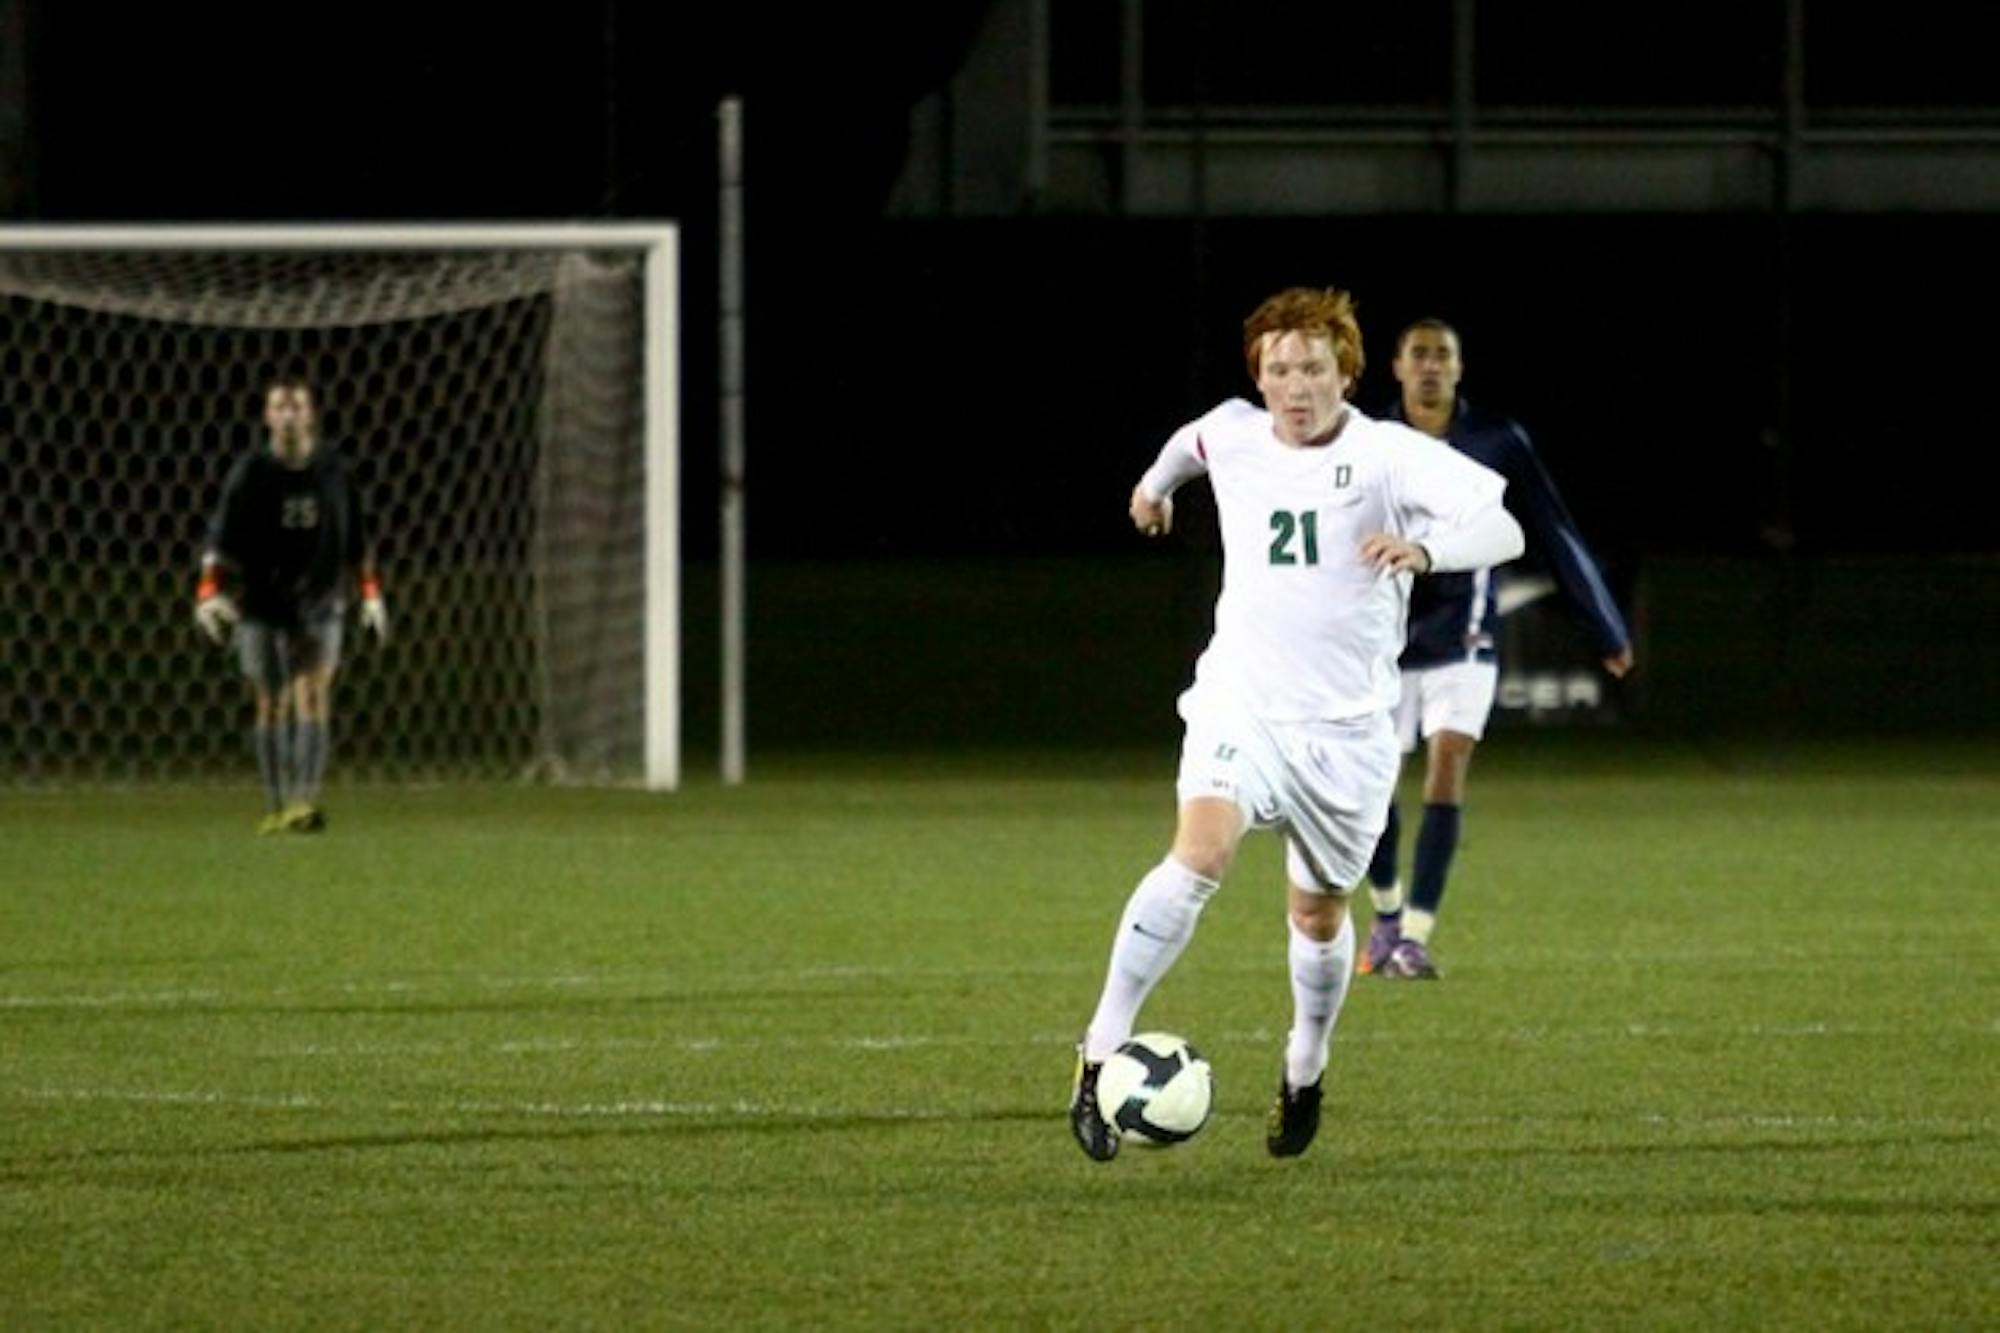 11.22.10.sports.MSOCCER